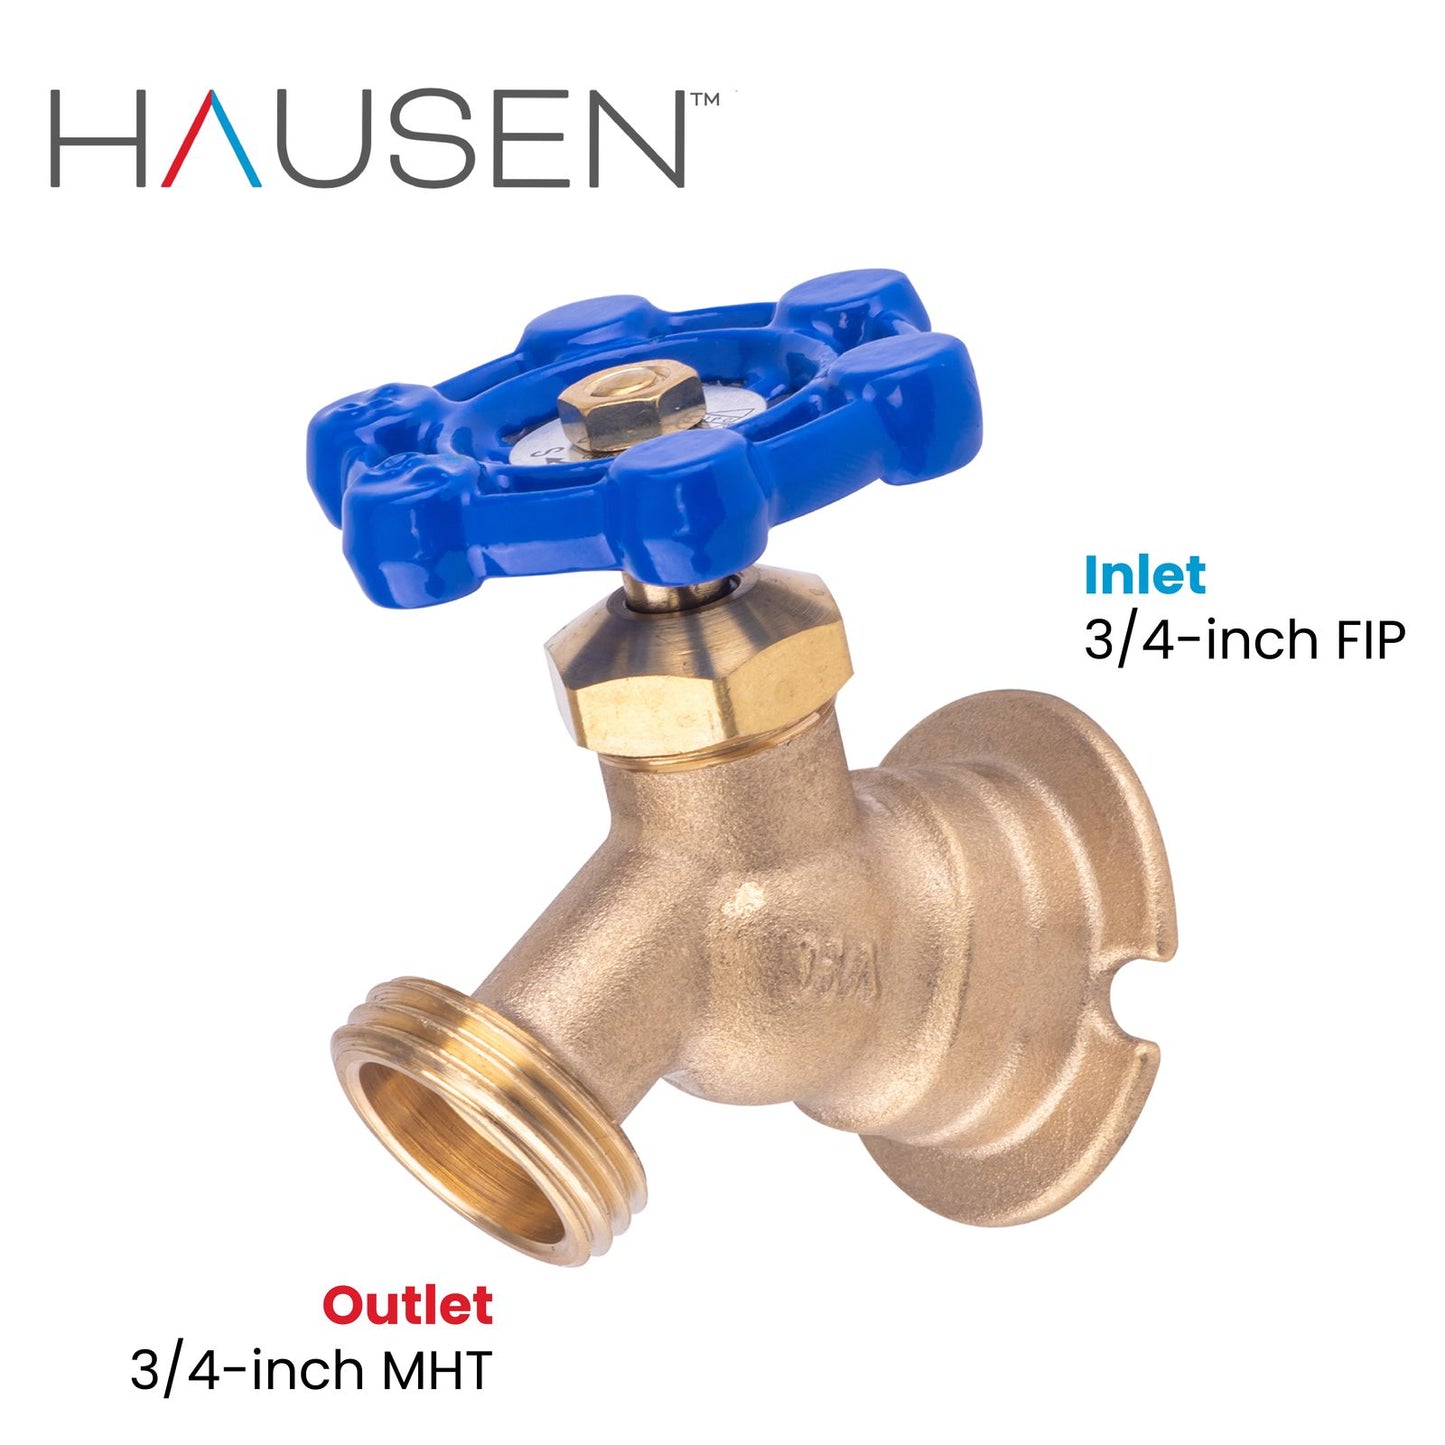 Hausen 3/4-inch FIP (Female Iron Pipe) x 3/4-inch MHT (Male Hose Thread) Brass Sillcock Valve with Handle Shutoff; cUPC Certified, Compatible with Standard Garden Hoses, 10-Pack